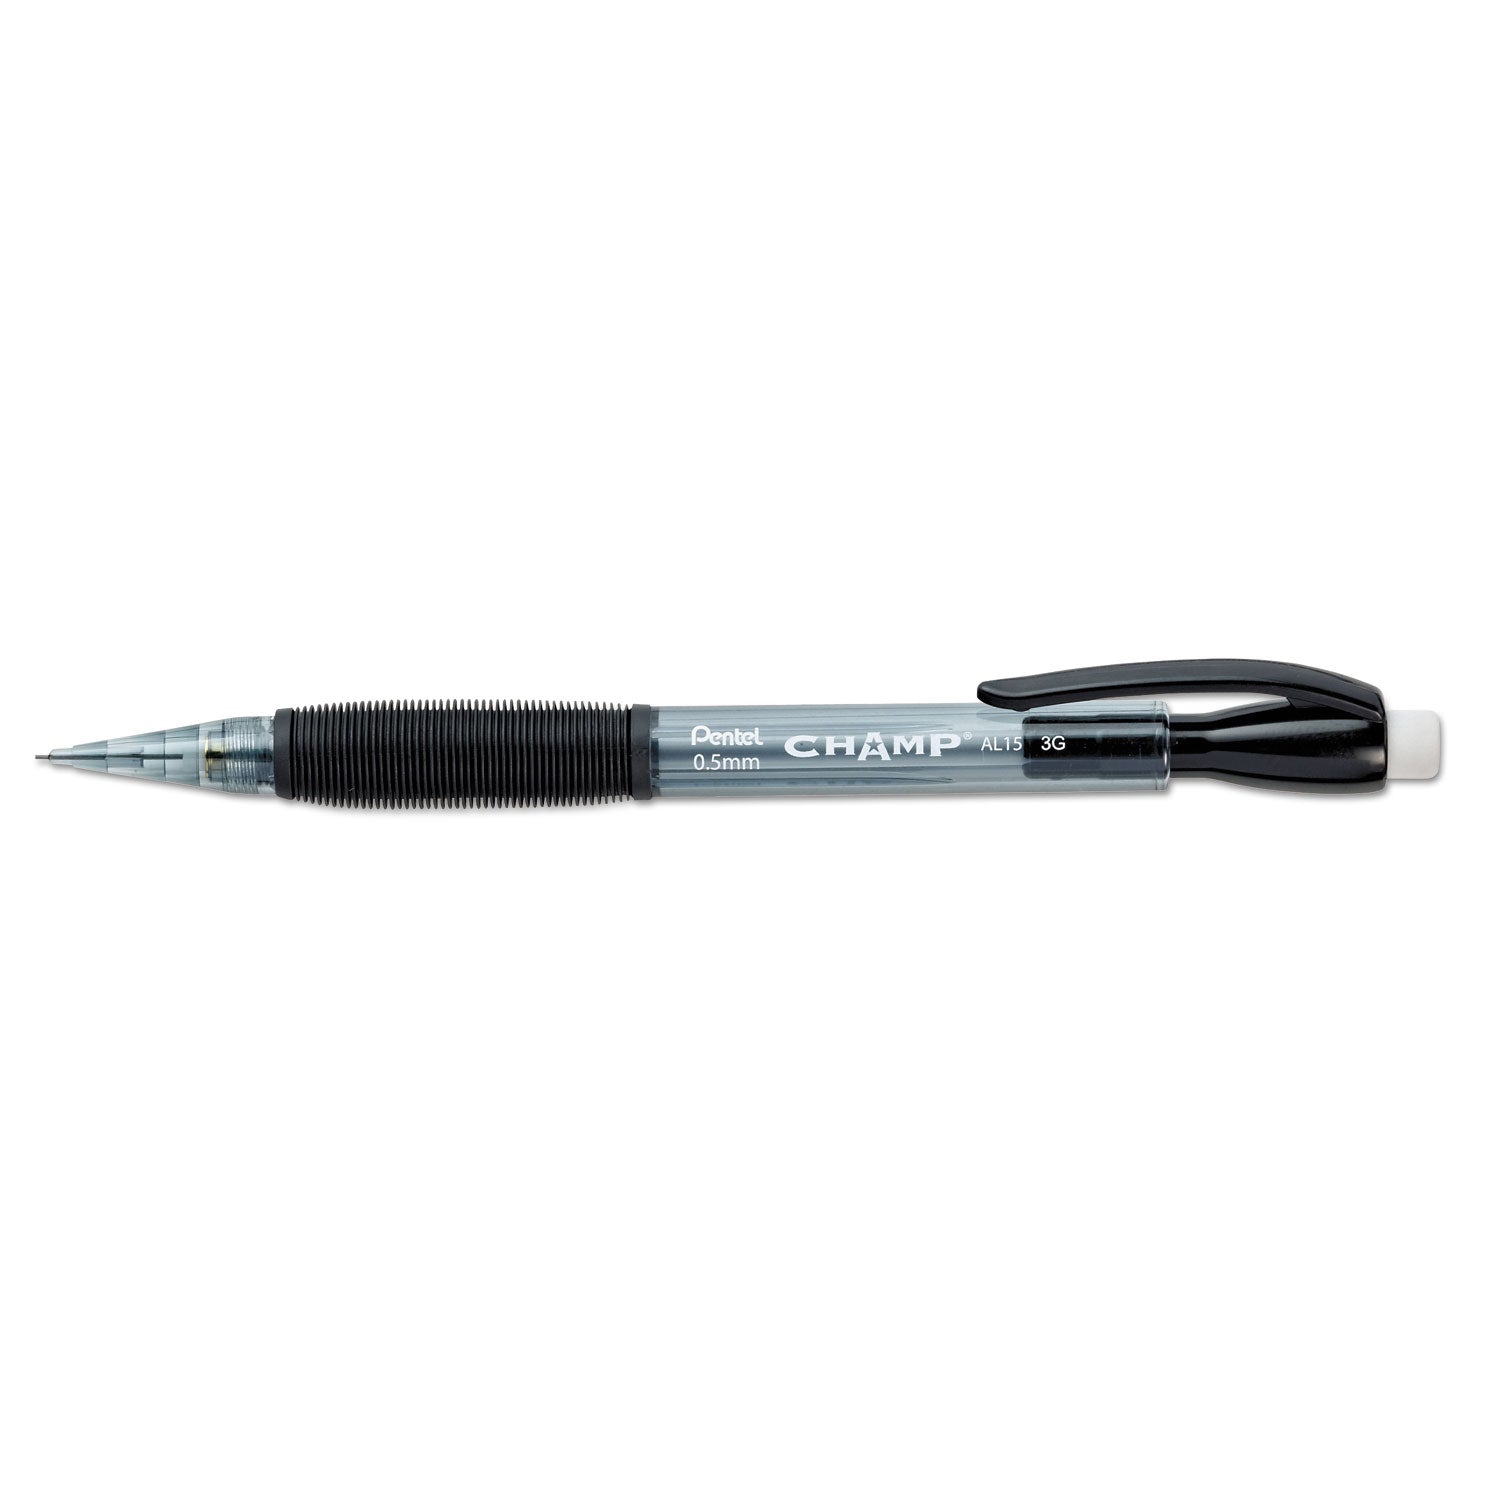 champ-mechanical-pencil-value-pack-05-mm-hb-#2-black-lead-clear-black-barrel-24-pack_penal15asw2 - 2